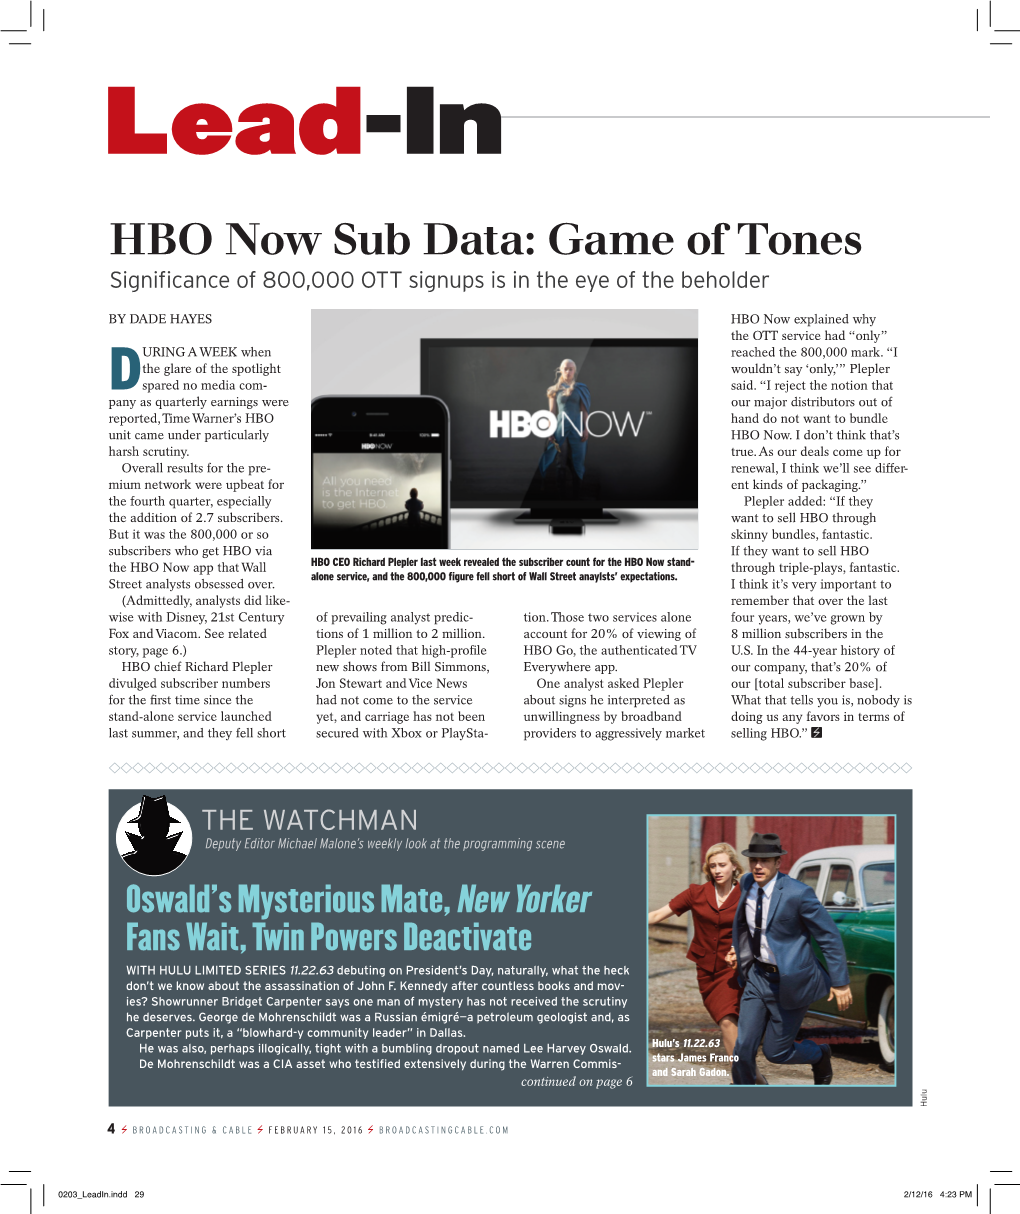 Lead-In HBO Now Sub Data: Game of Tones Signiﬁ Cance of 800,000 OTT Signups Is in the Eye of the Beholder